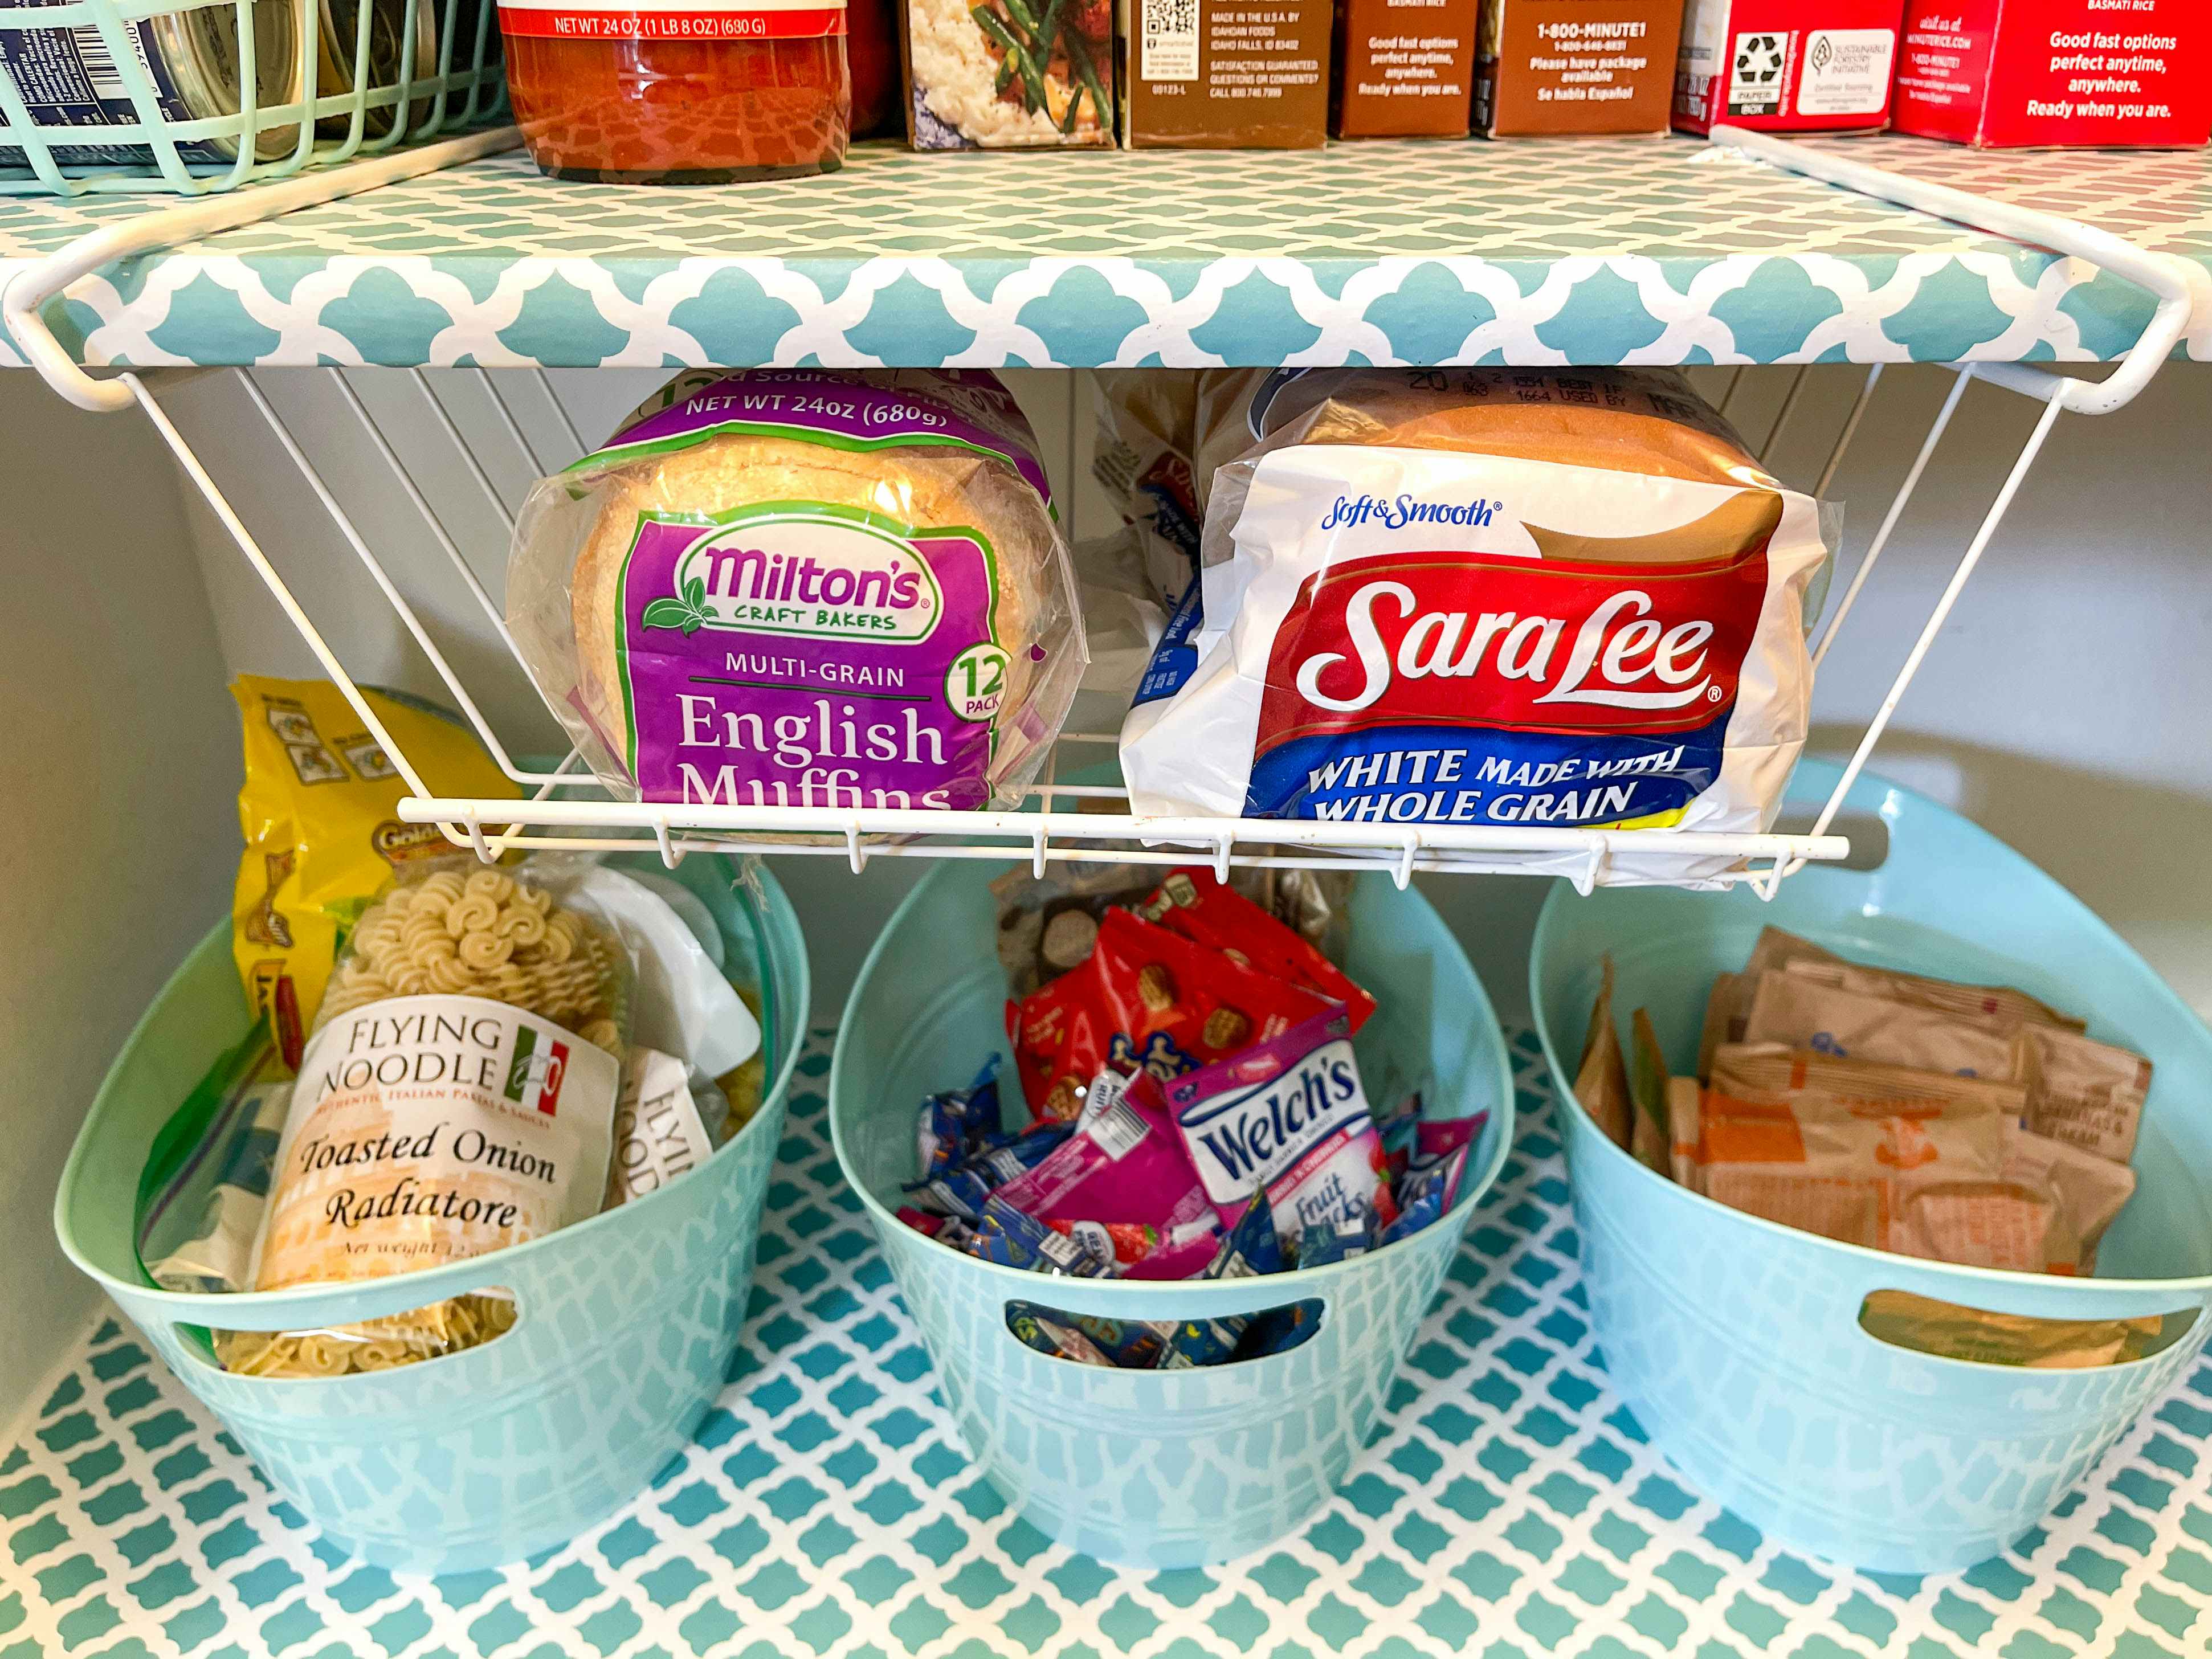 5 Brilliant Tips for Organizing All of Your Snacks, According to a Pro